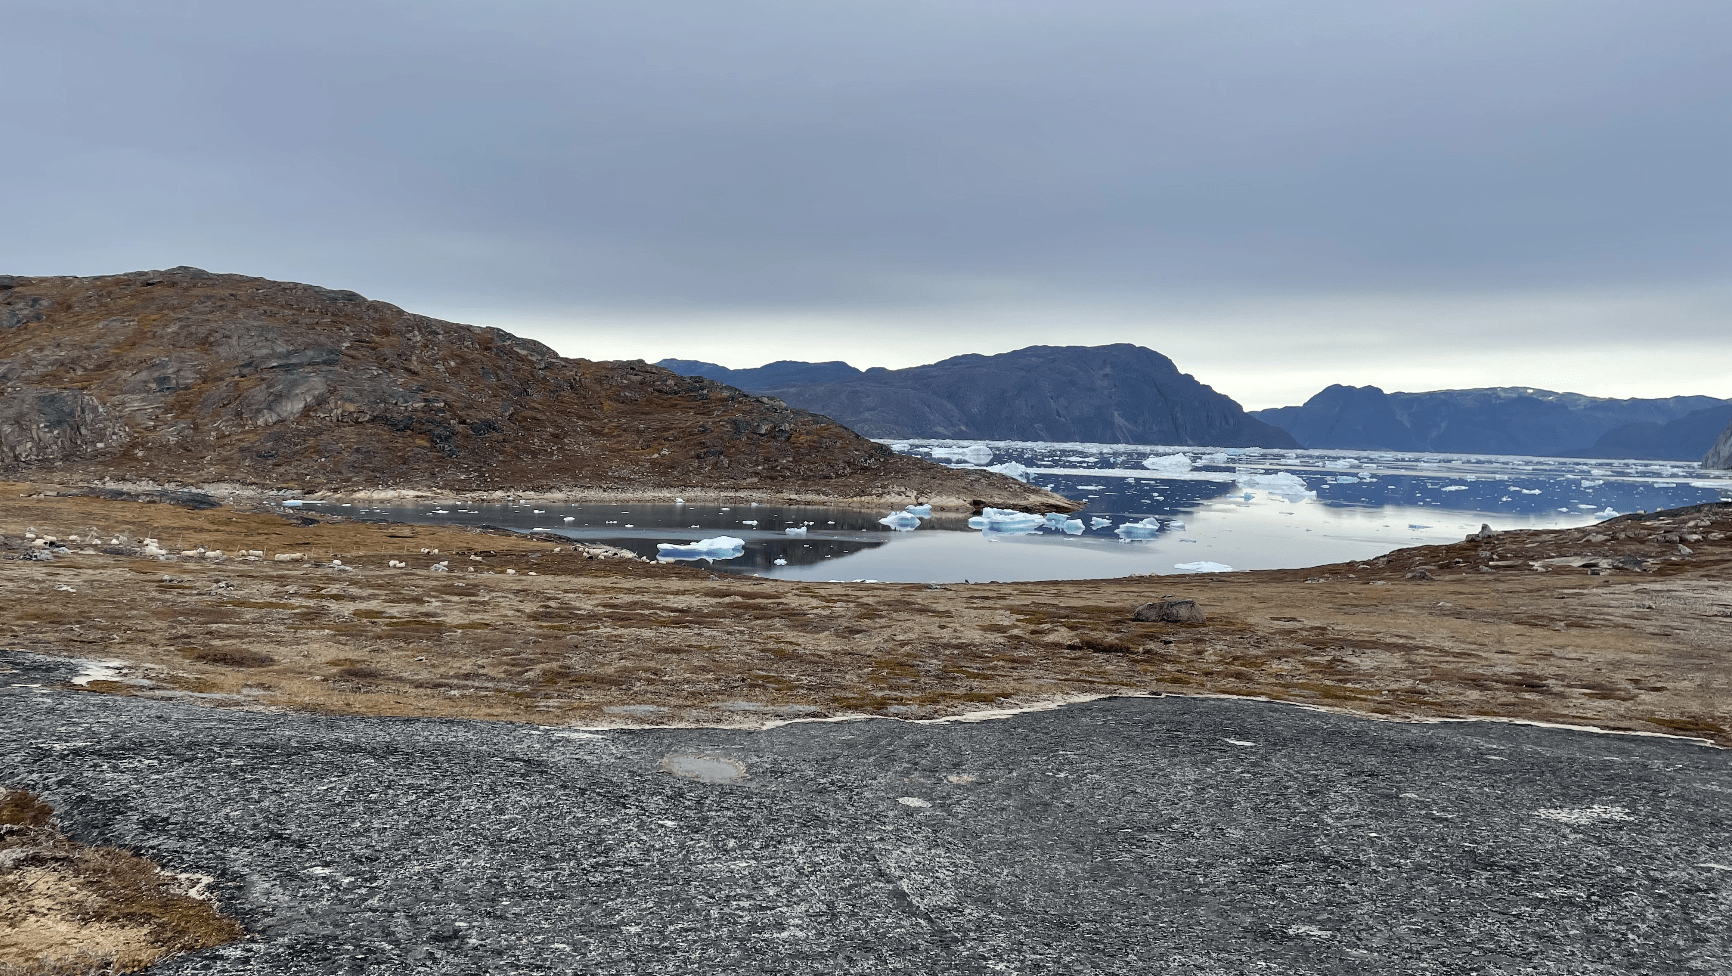 Two students explore the fjords of Greenland aboard a research vessel